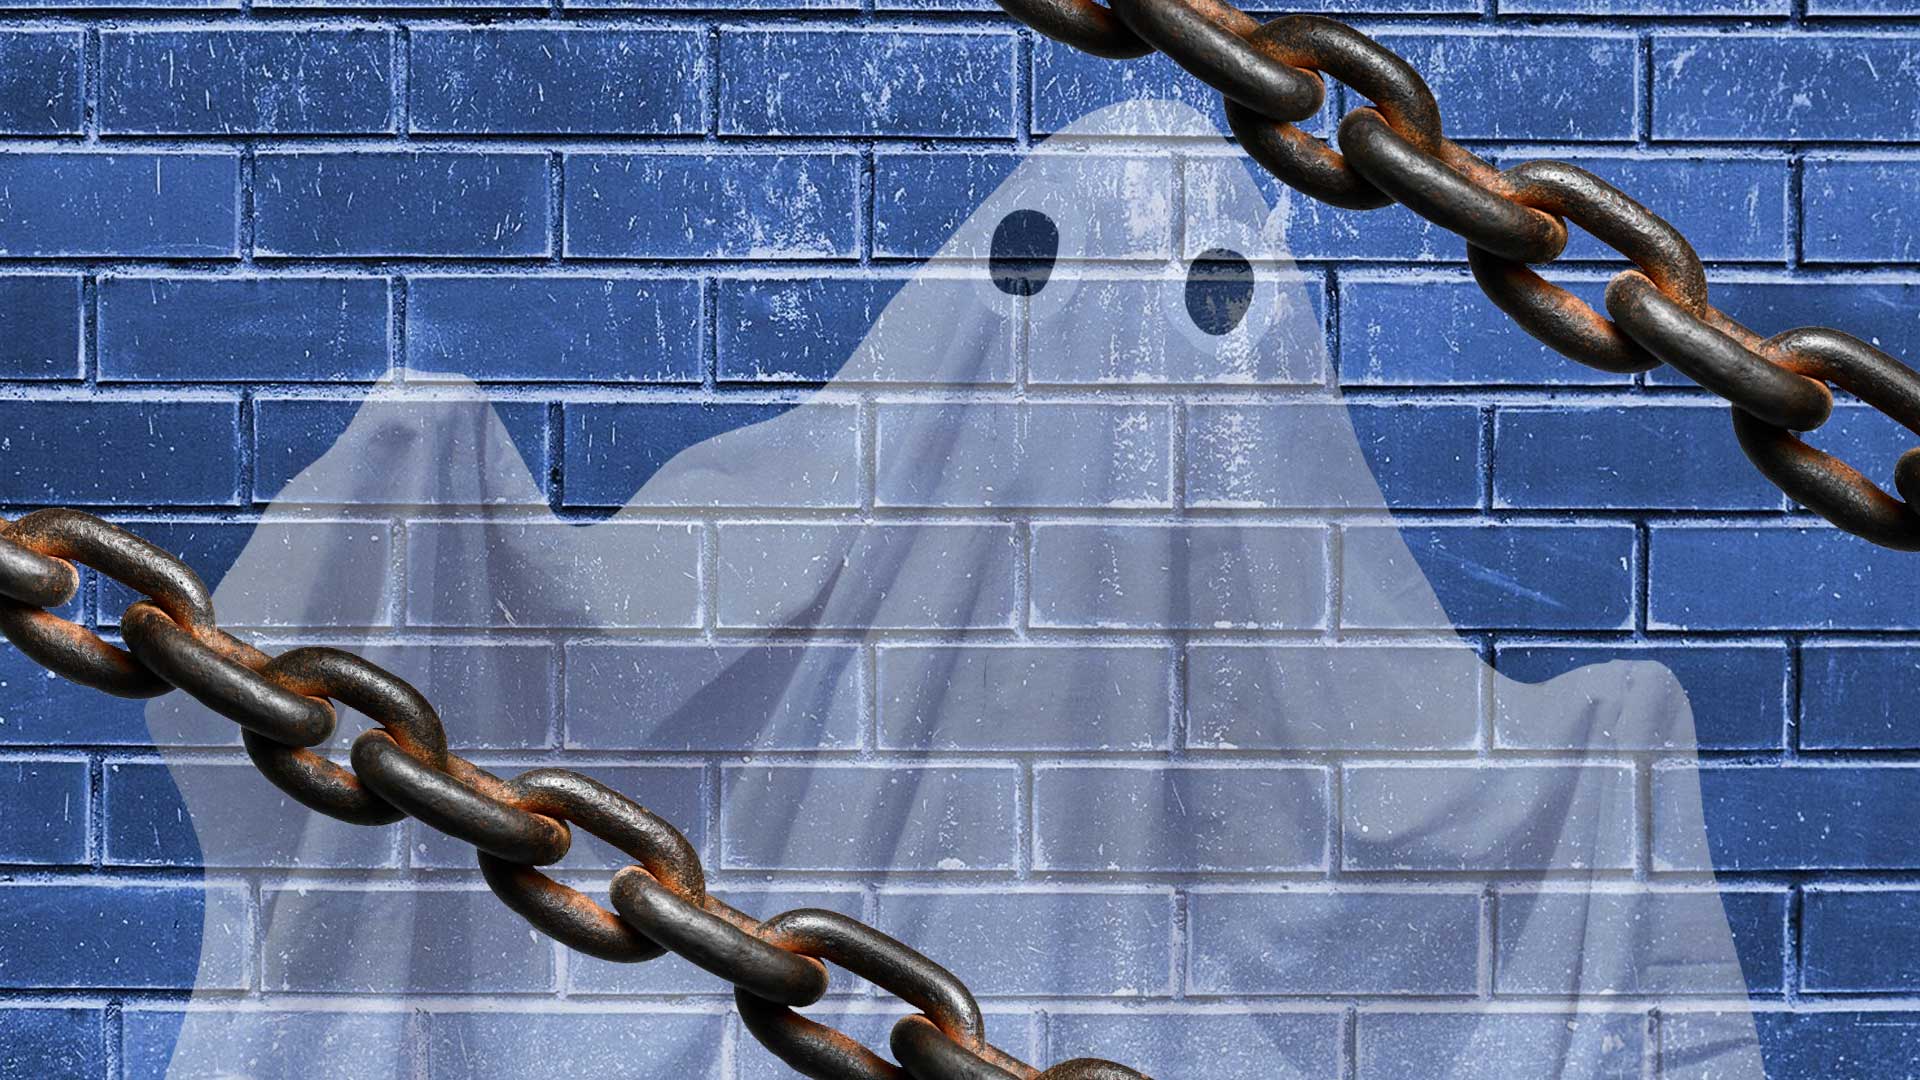 A ghost surrounded by chains